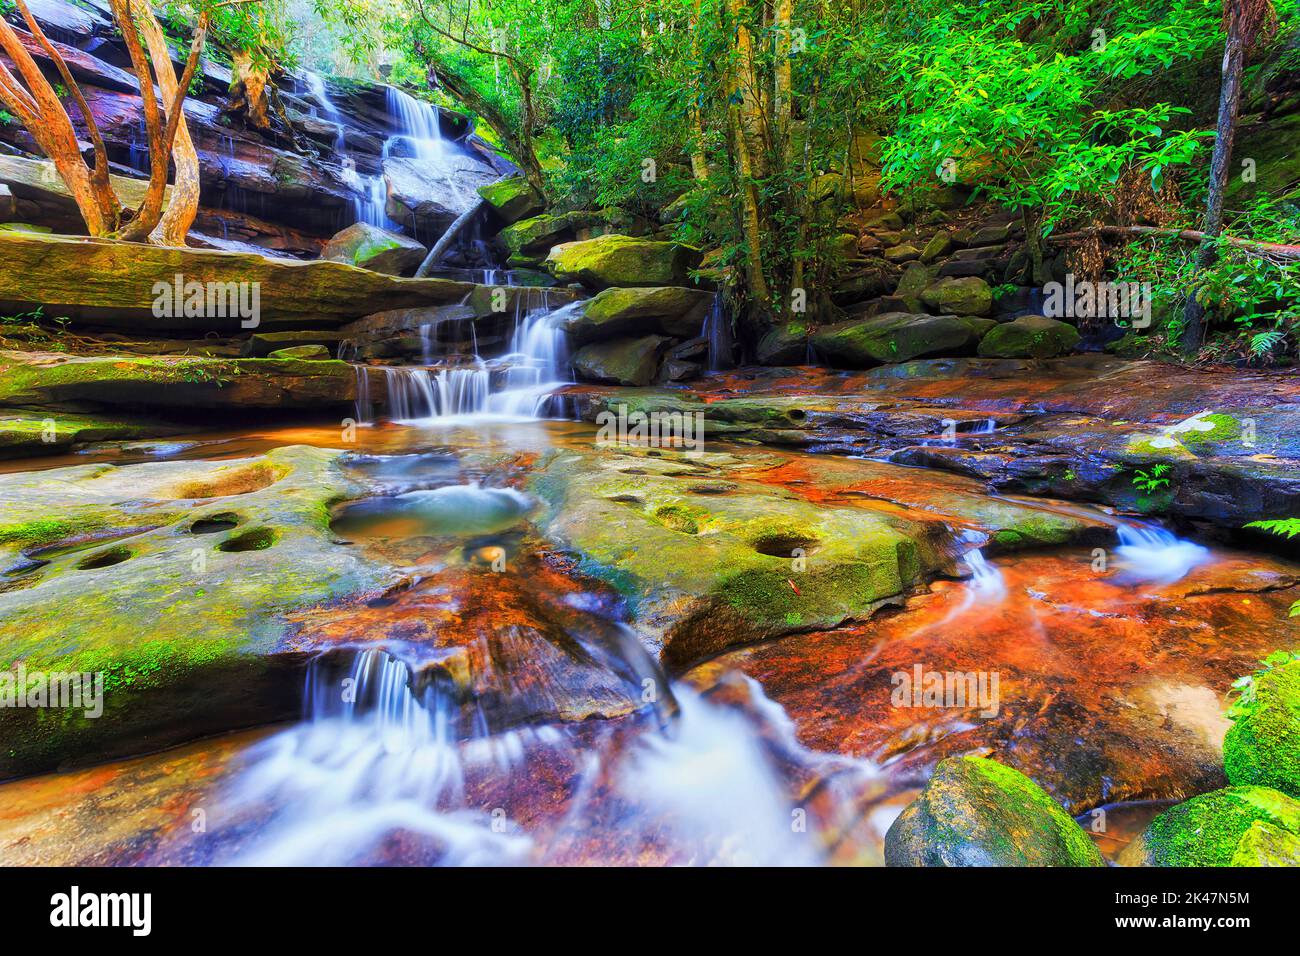 Rainforest waterfall in Somersby on Central coast of Australia - scenic nature landscape. Stock Photo